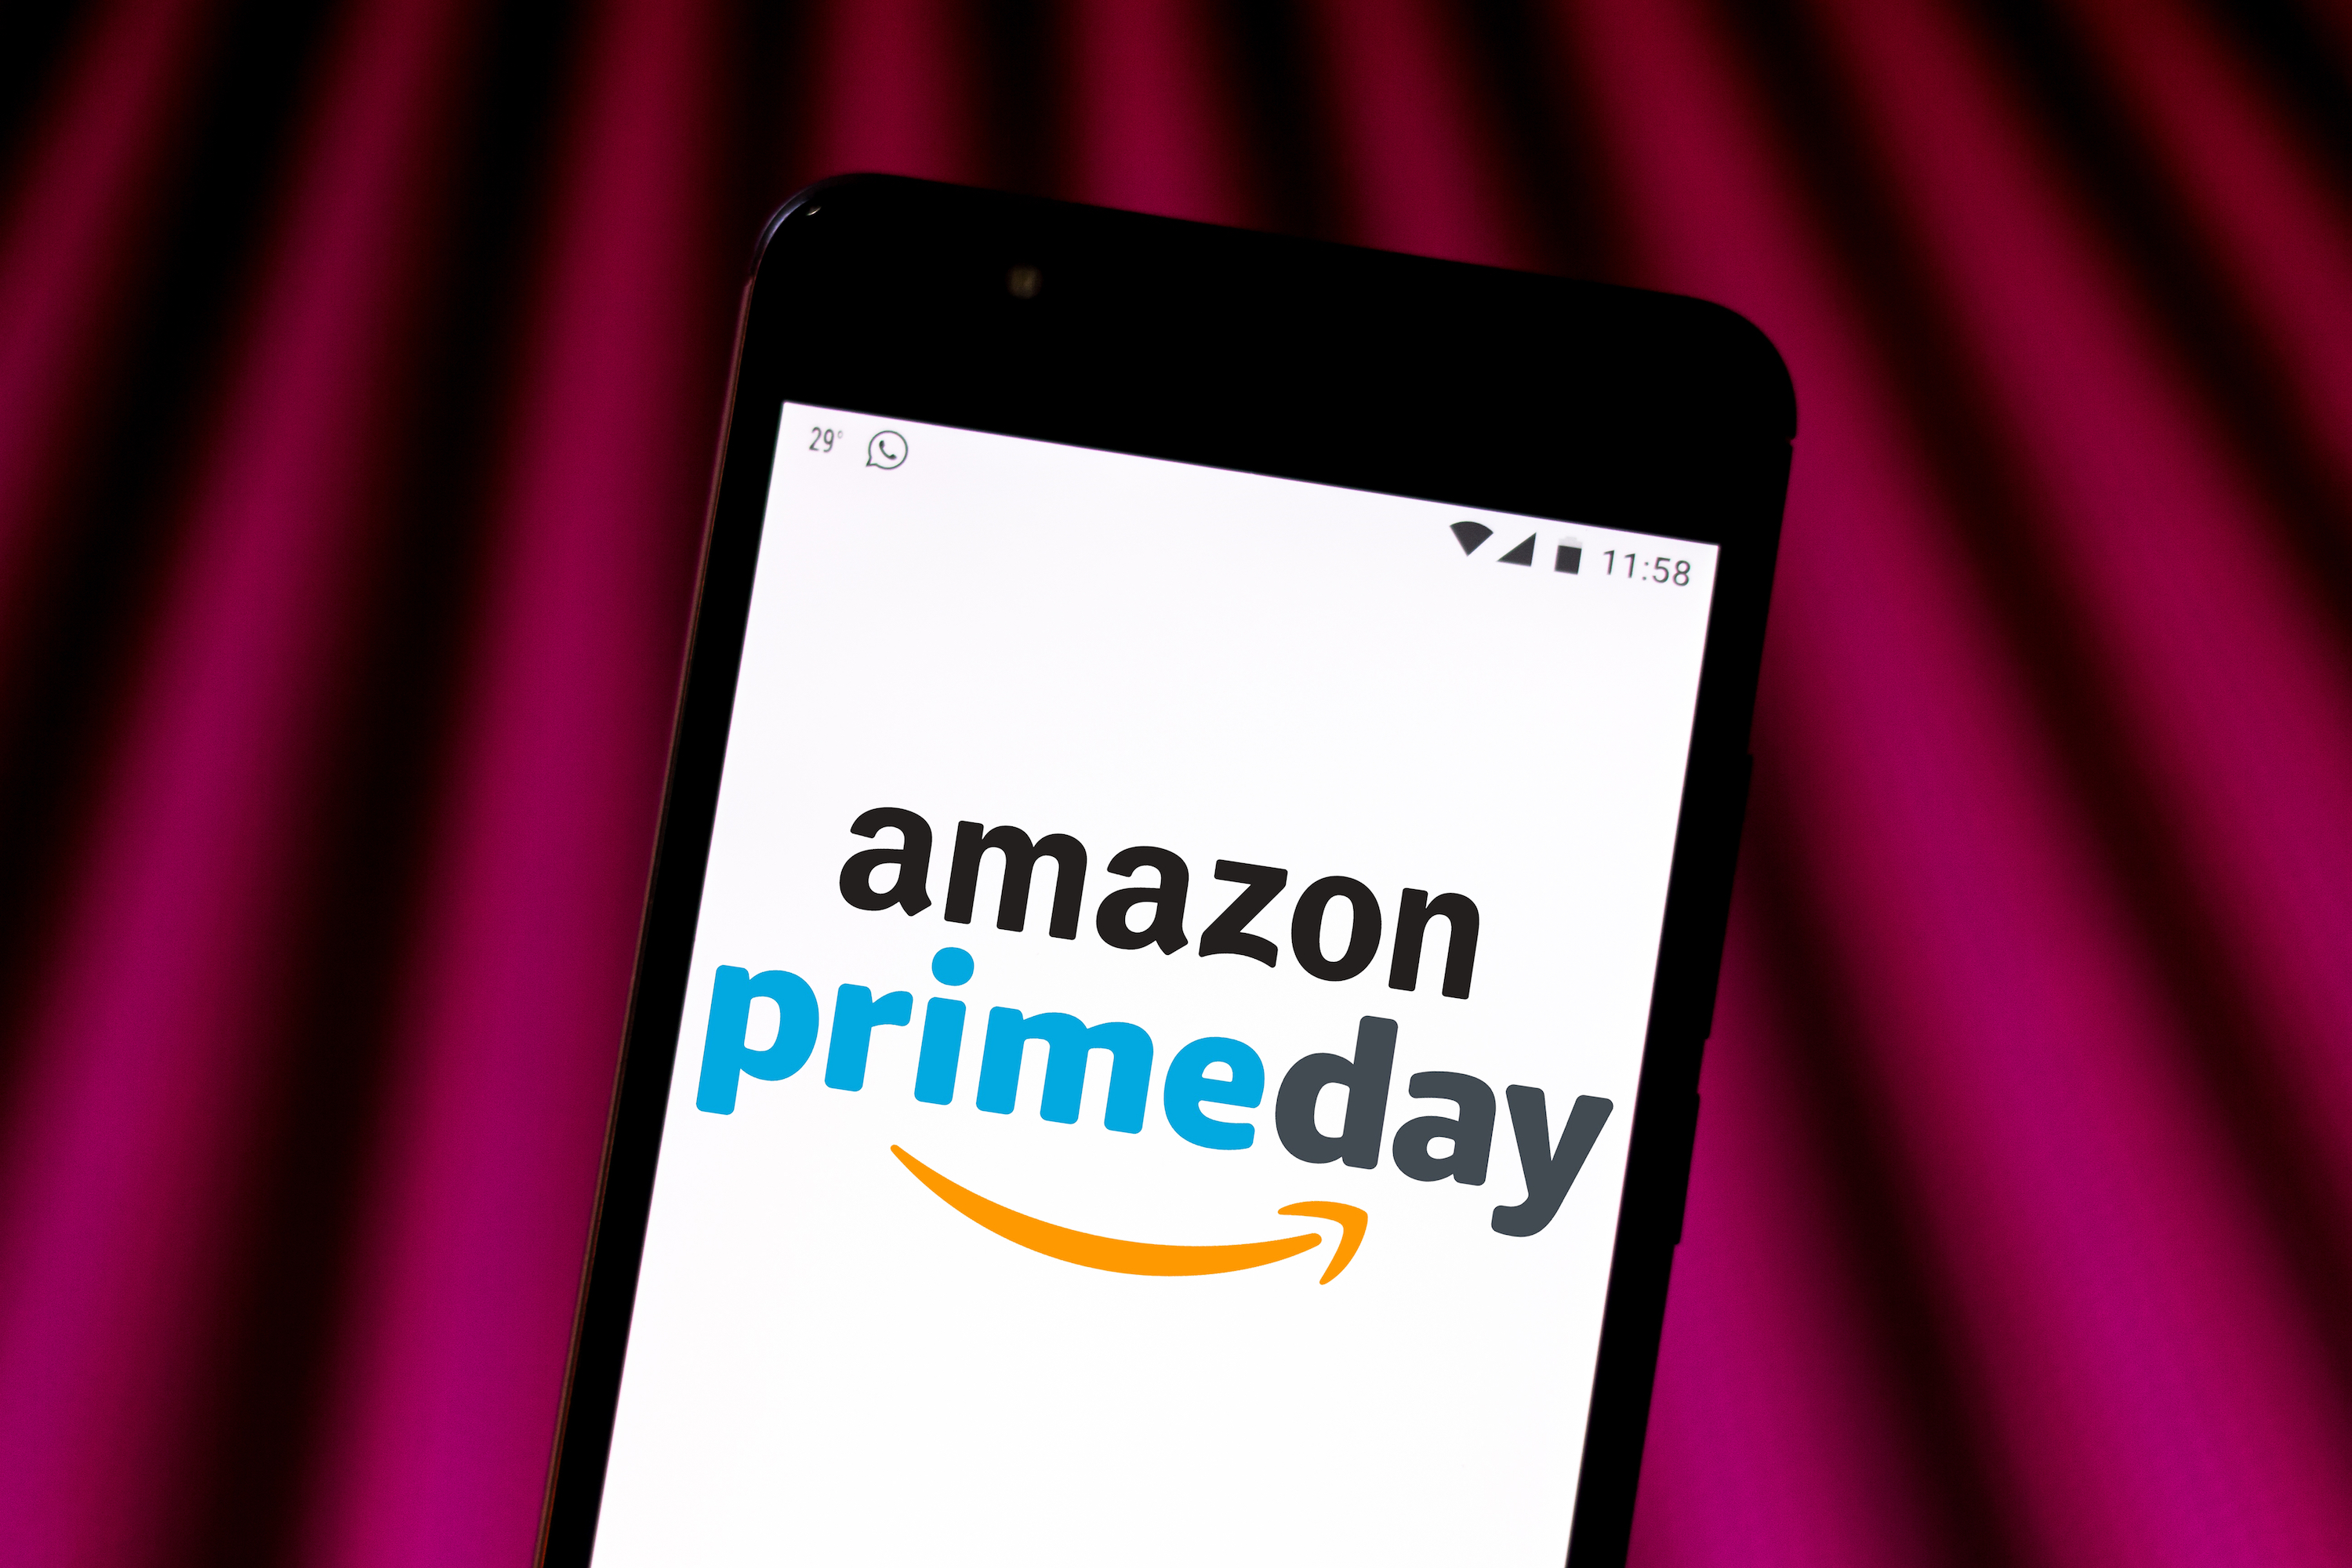 My Favorite Game This Year Is on Sale for Prime Day - CNET